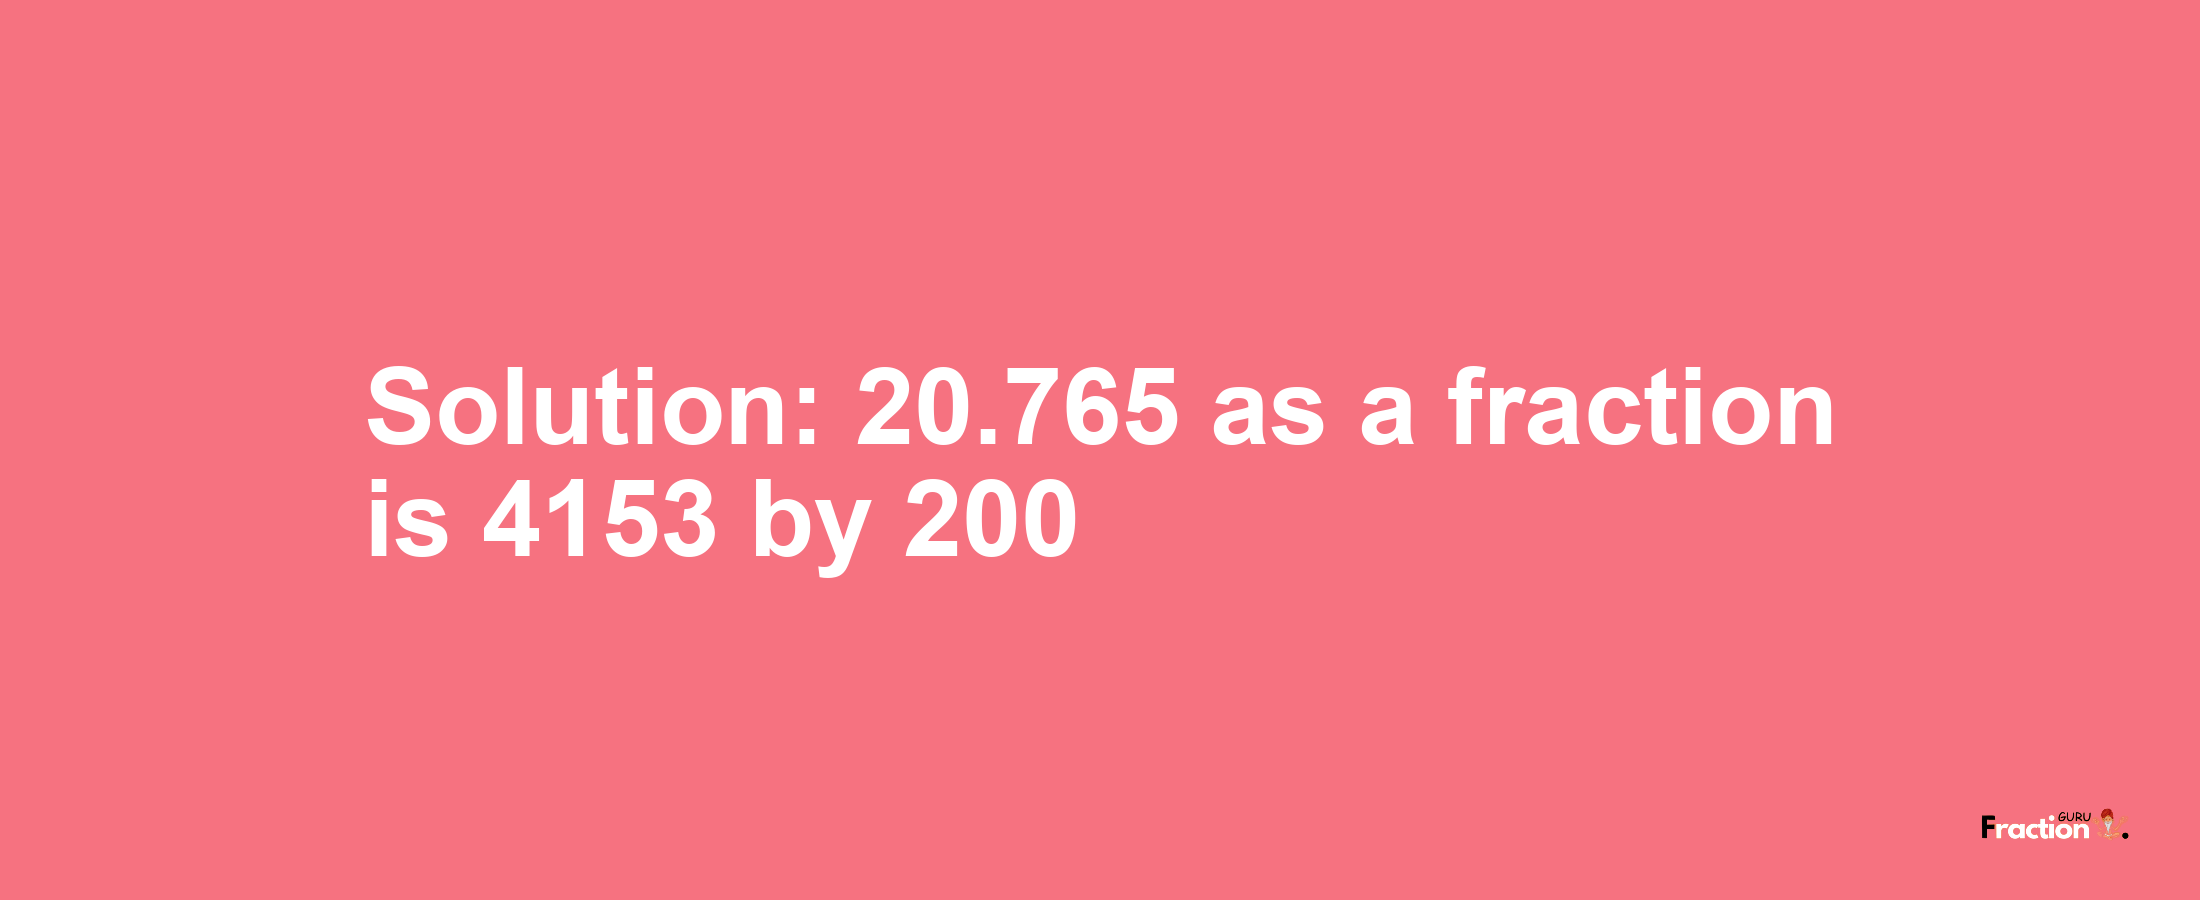 Solution:20.765 as a fraction is 4153/200